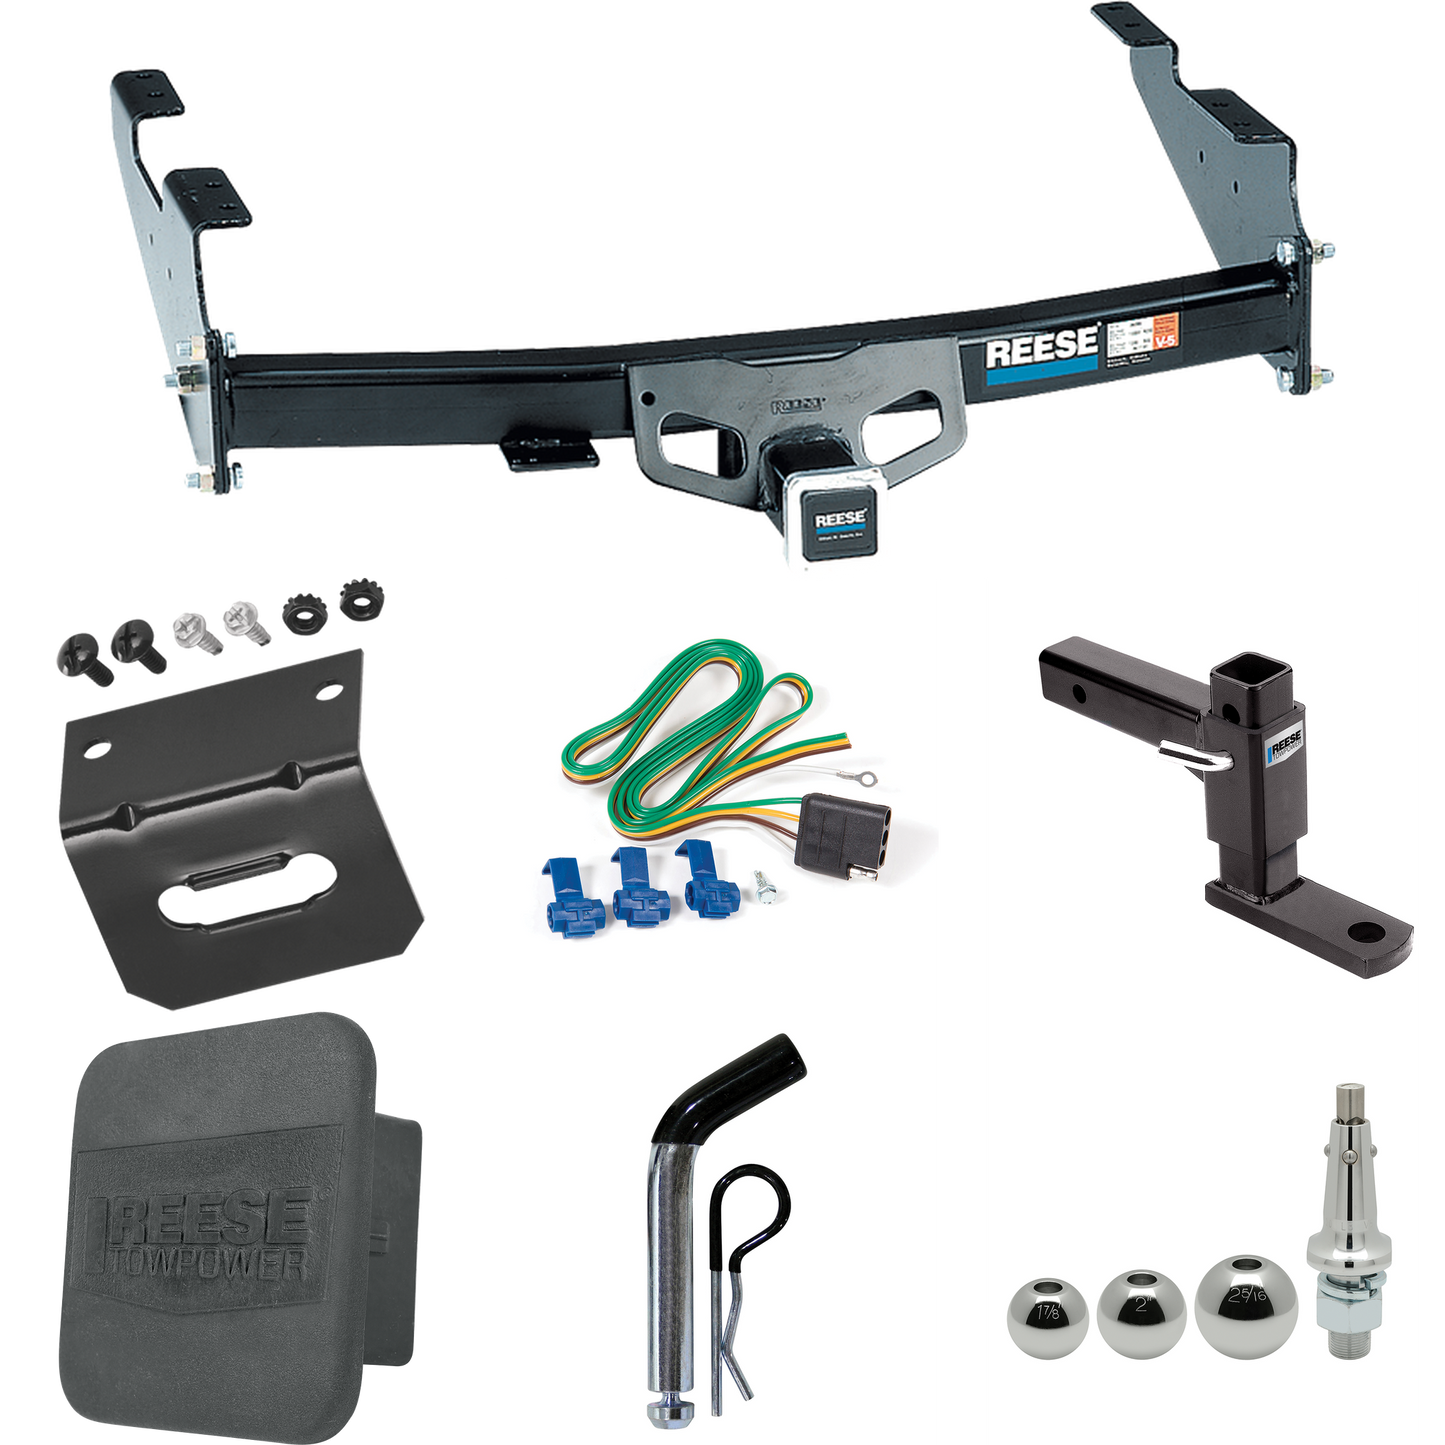 Fits 1997-1999 Ford F-250 Trailer Hitch Tow PKG w/ 4-Flat Wiring + Adjustable Drop Rise Ball Mount + Pin/Clip + Inerchangeable 1-7/8" & 2" & 2-5/16" Balls + Wiring Bracket + Hitch Cover (For Styleside Models) By Reese Towpower